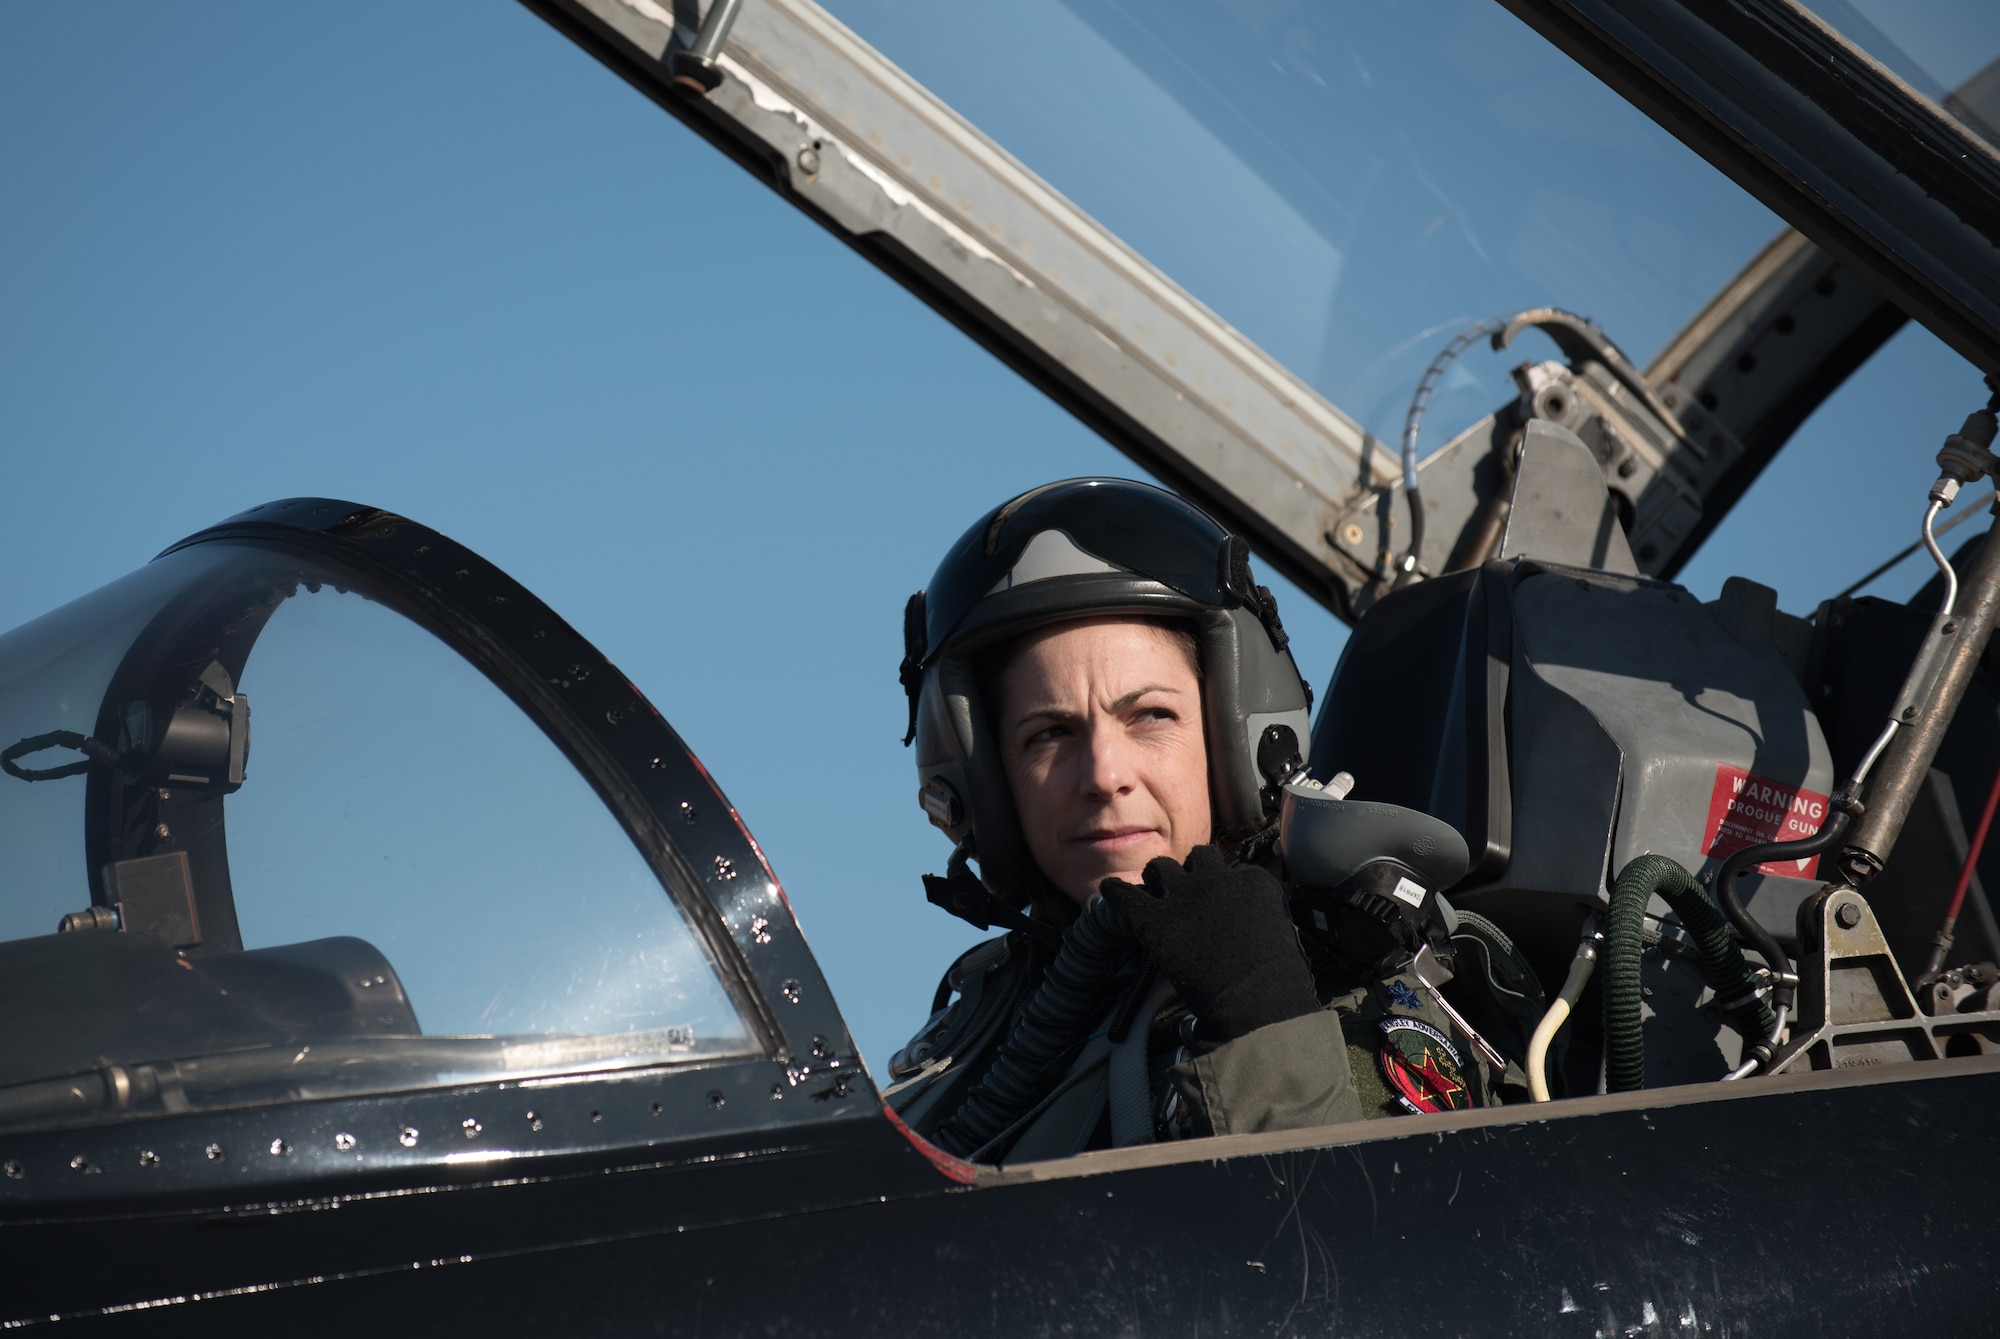 U.S Air Force Lt. Col. Cheryl Buehn, 71st Fighter Training Squadron T-38A Talon instructor pilot, prepares for takeoff at Joint Base Langley-Eustis, Virginia, March 13, 2018.